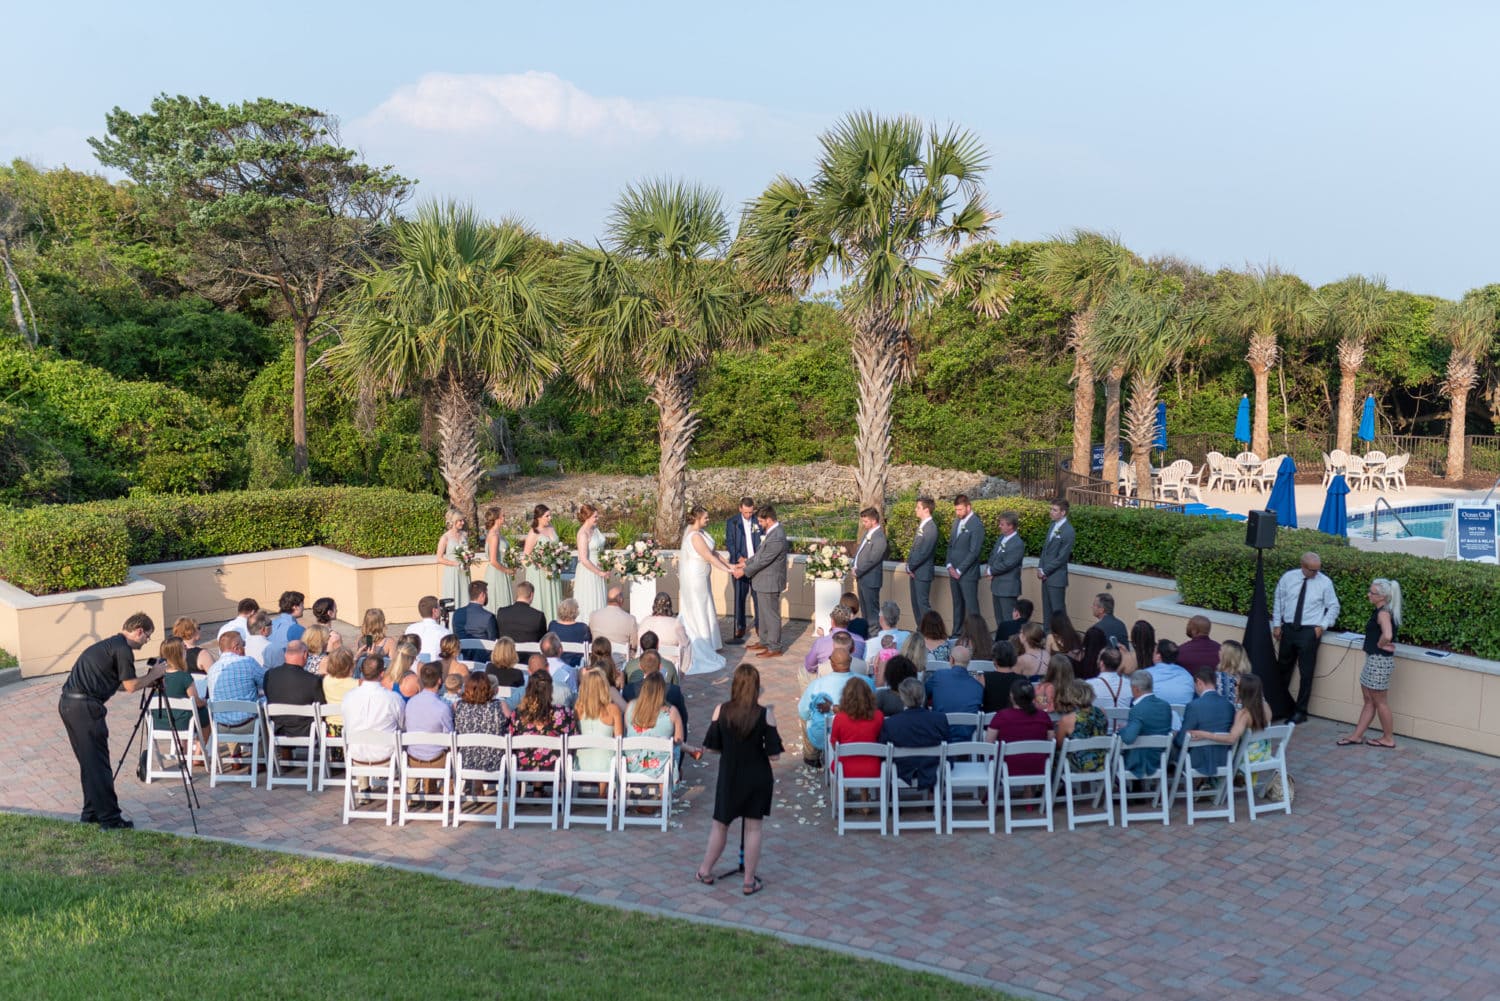 Wedding ceremony by the palm trees on the patio - Grande Dunes Ocean Club - Myrtle Beach